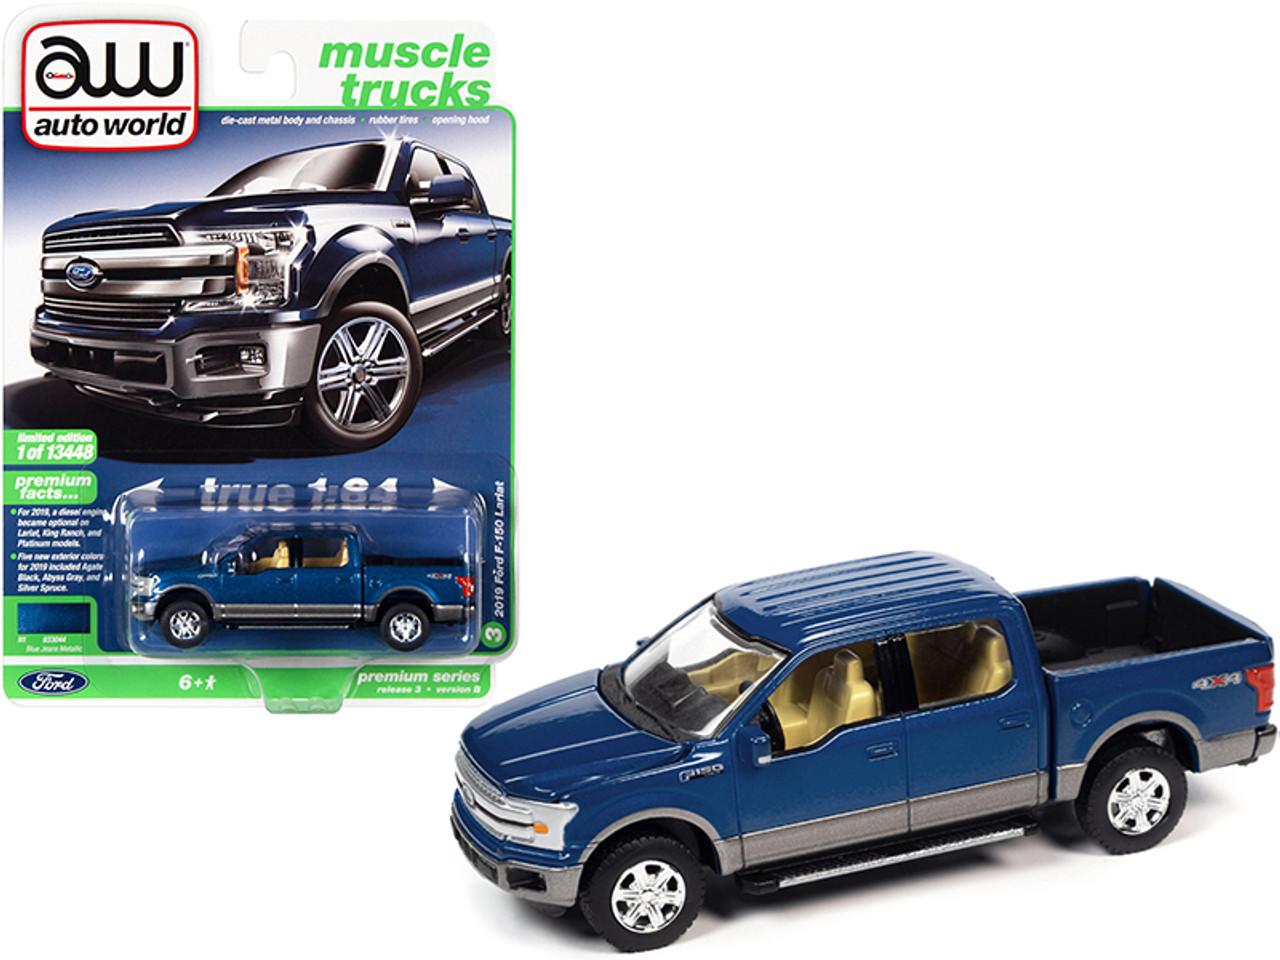 2019 Ford F-150 Lariat 4x4 Pickup Truck Blue Jeans Metallic and Magnetic Gray "Muscle Trucks" Limited Edition to 13448 pieces Worldwide 1/64 Diecast Model Car by Autoworld